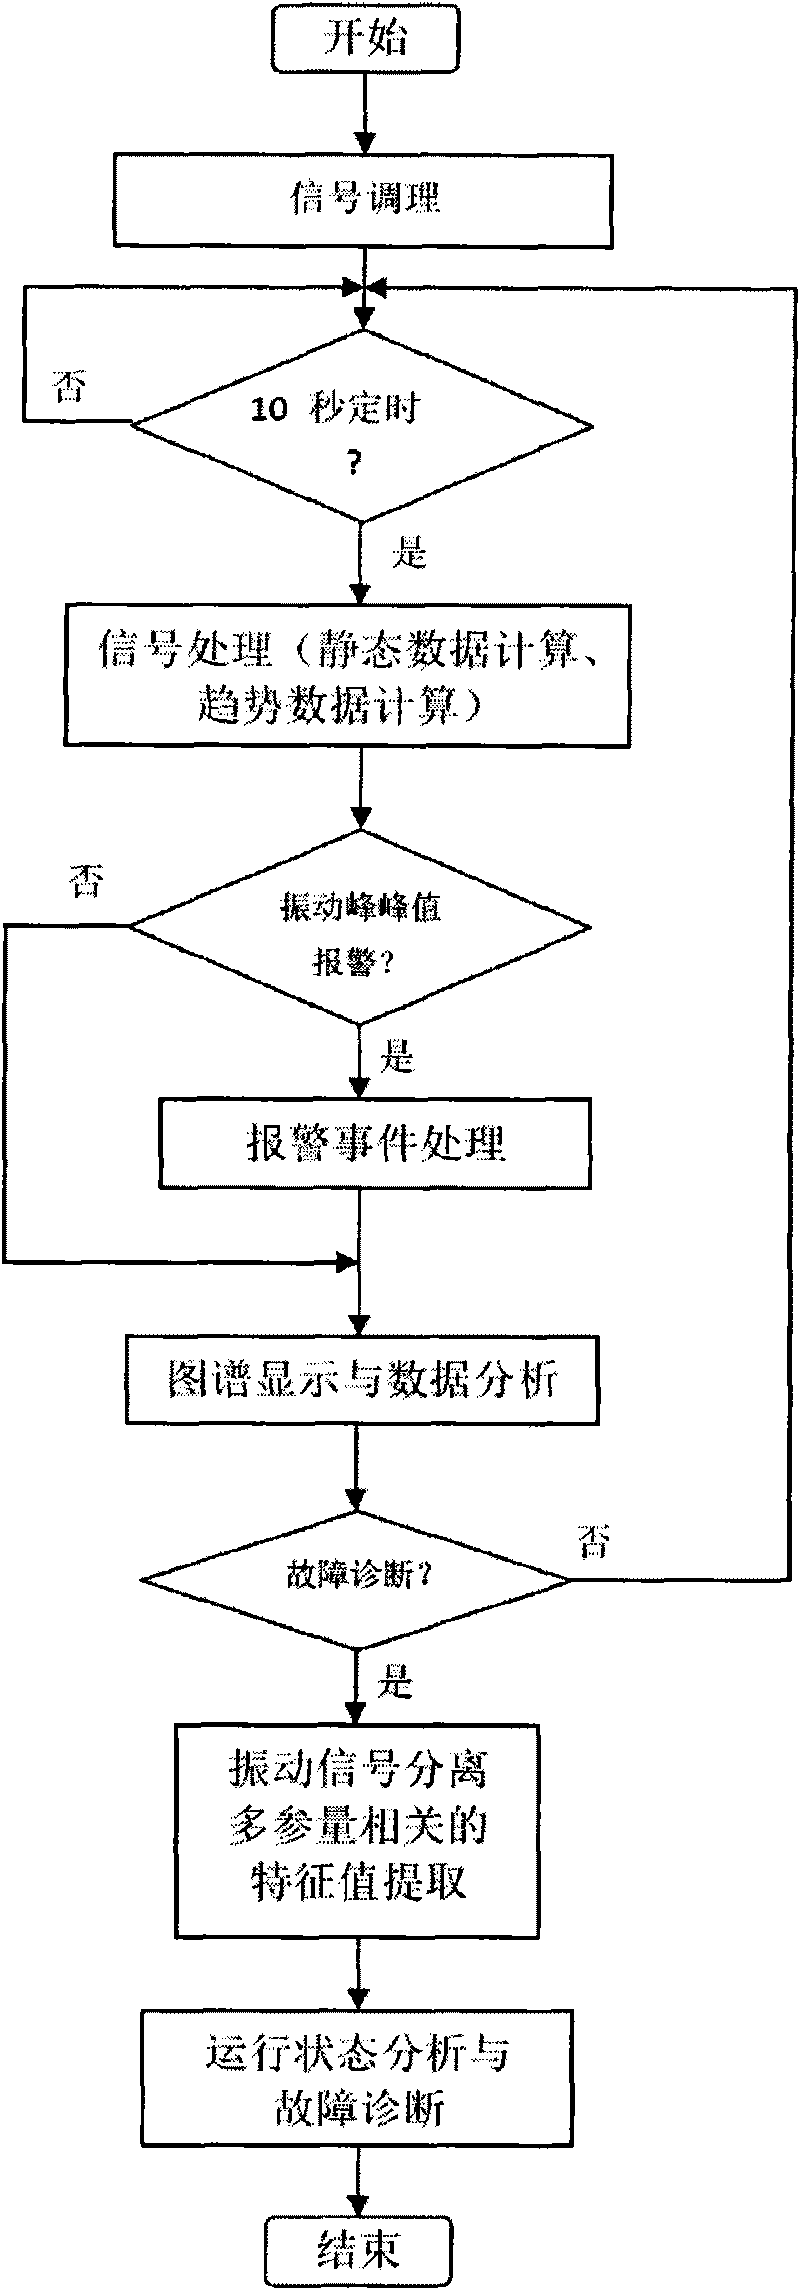 Methods for vibration online monitoring and fault diagnosis of power transformer